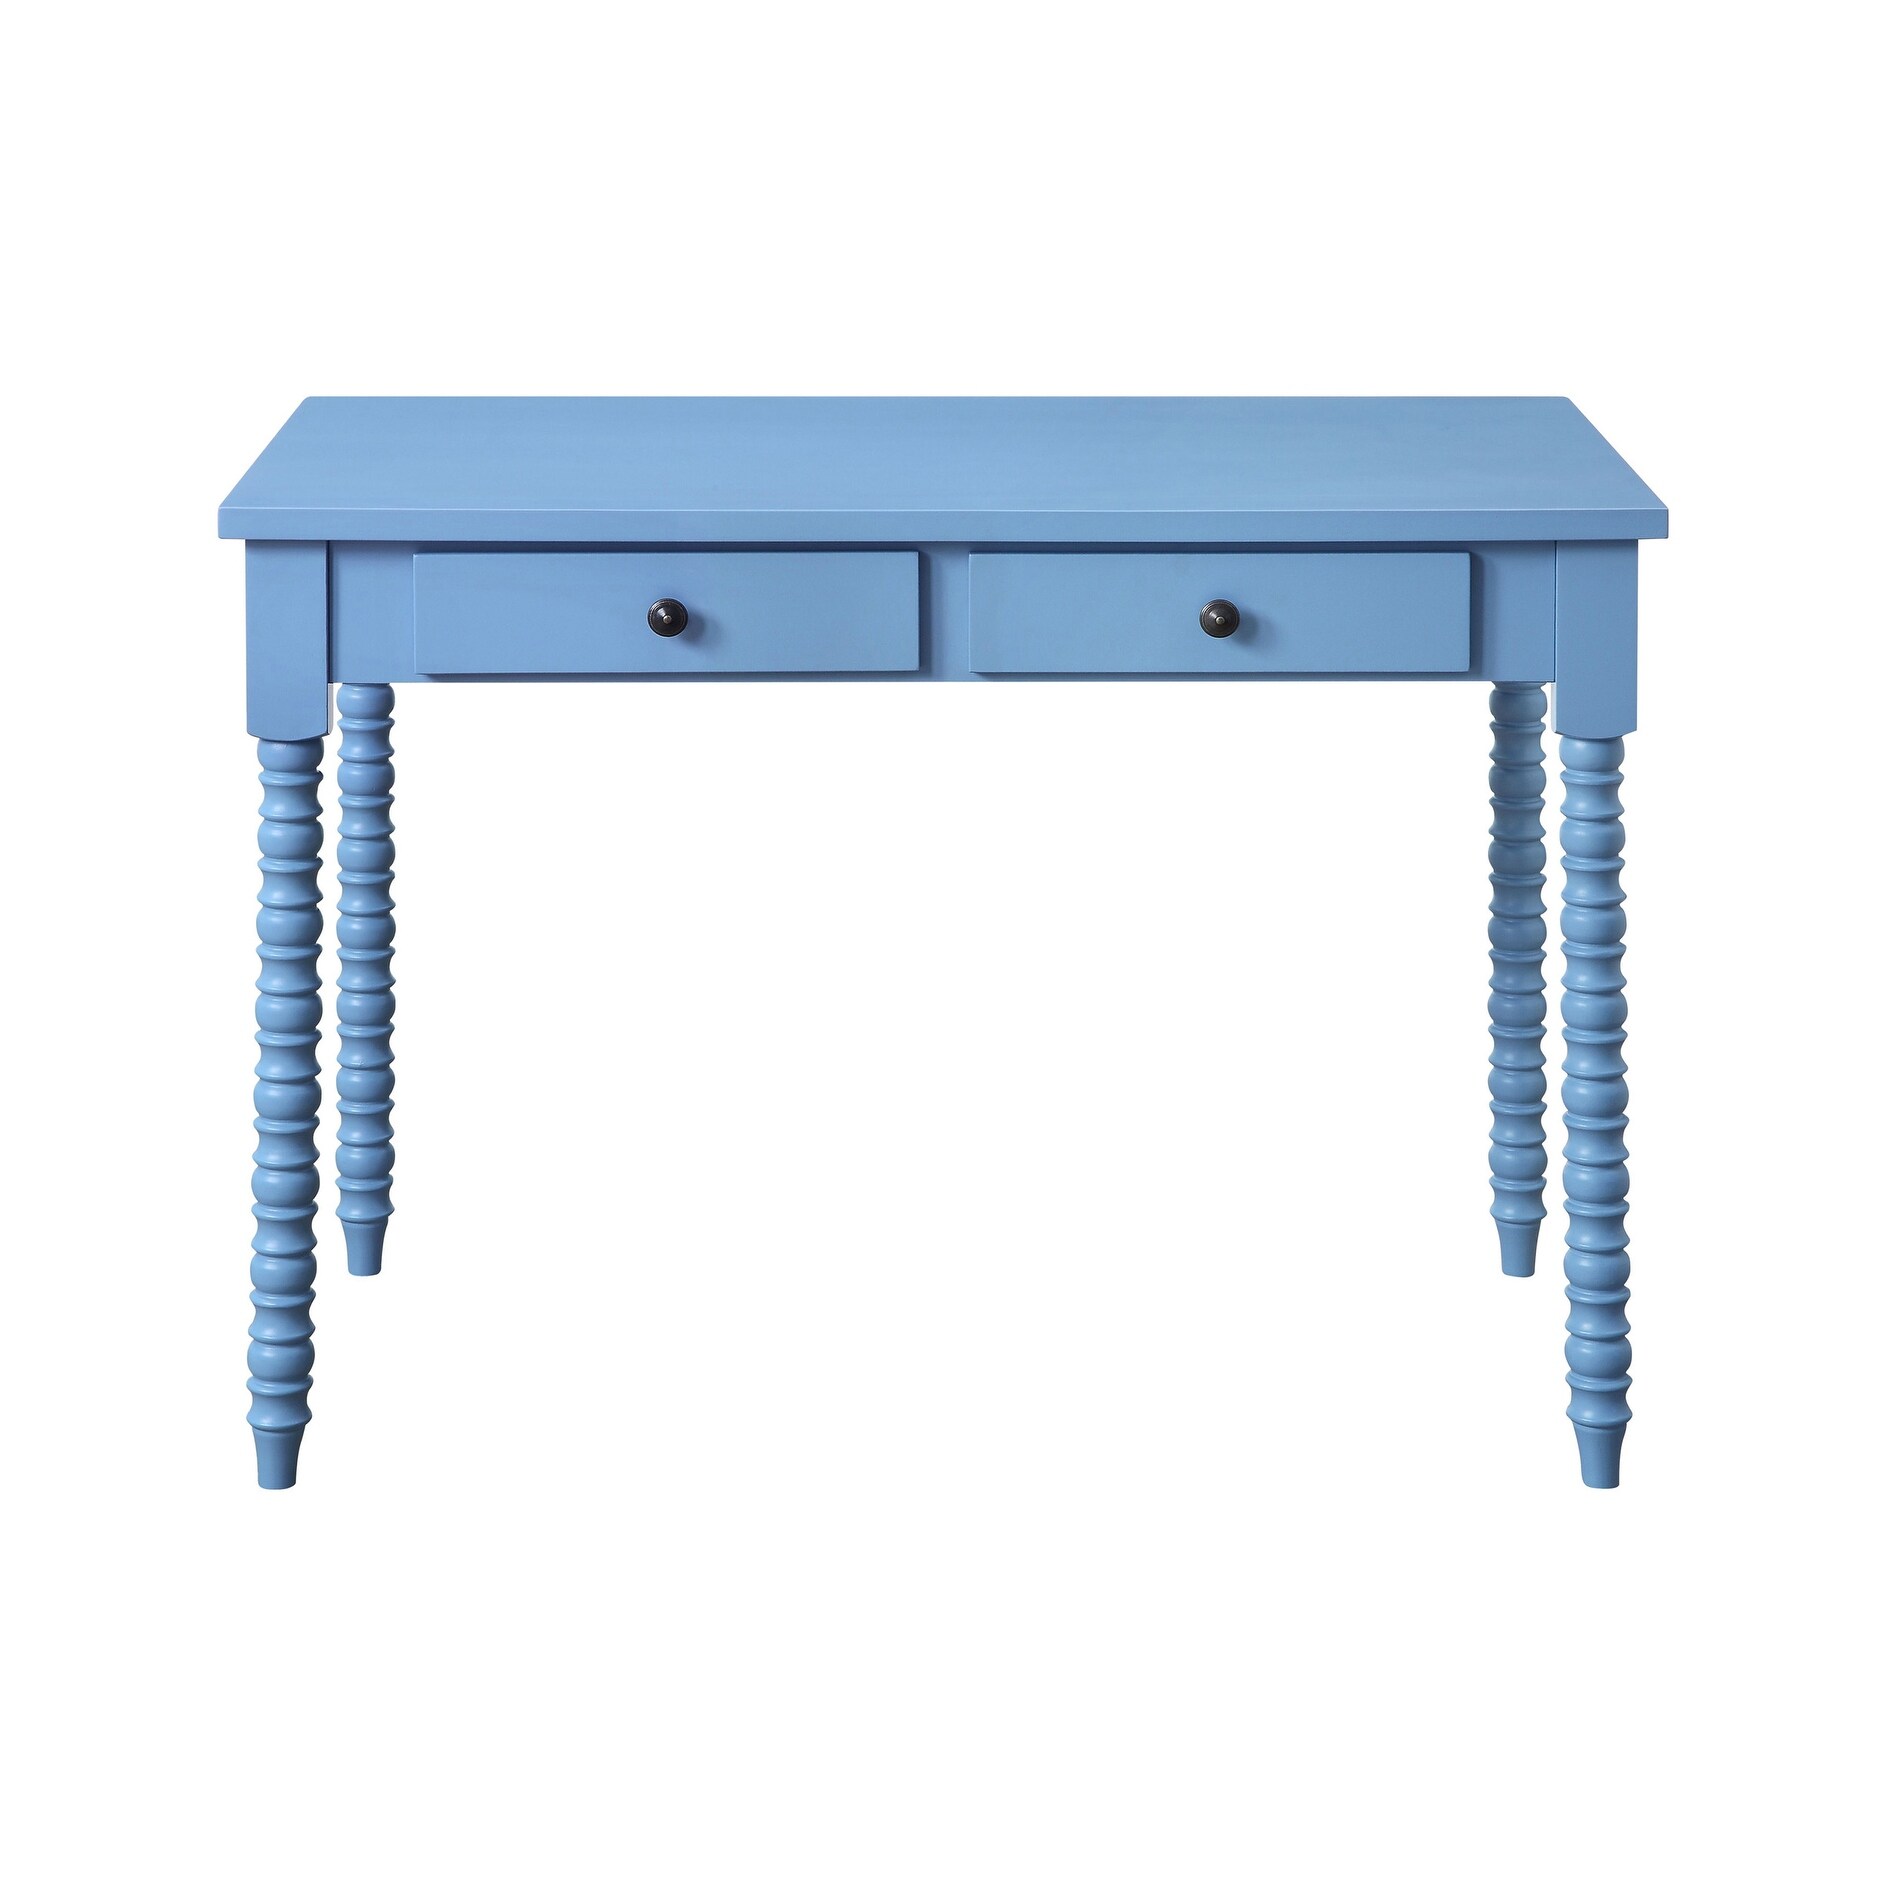 ACME Altmar Writing Desk in Blue - image 2 of 5